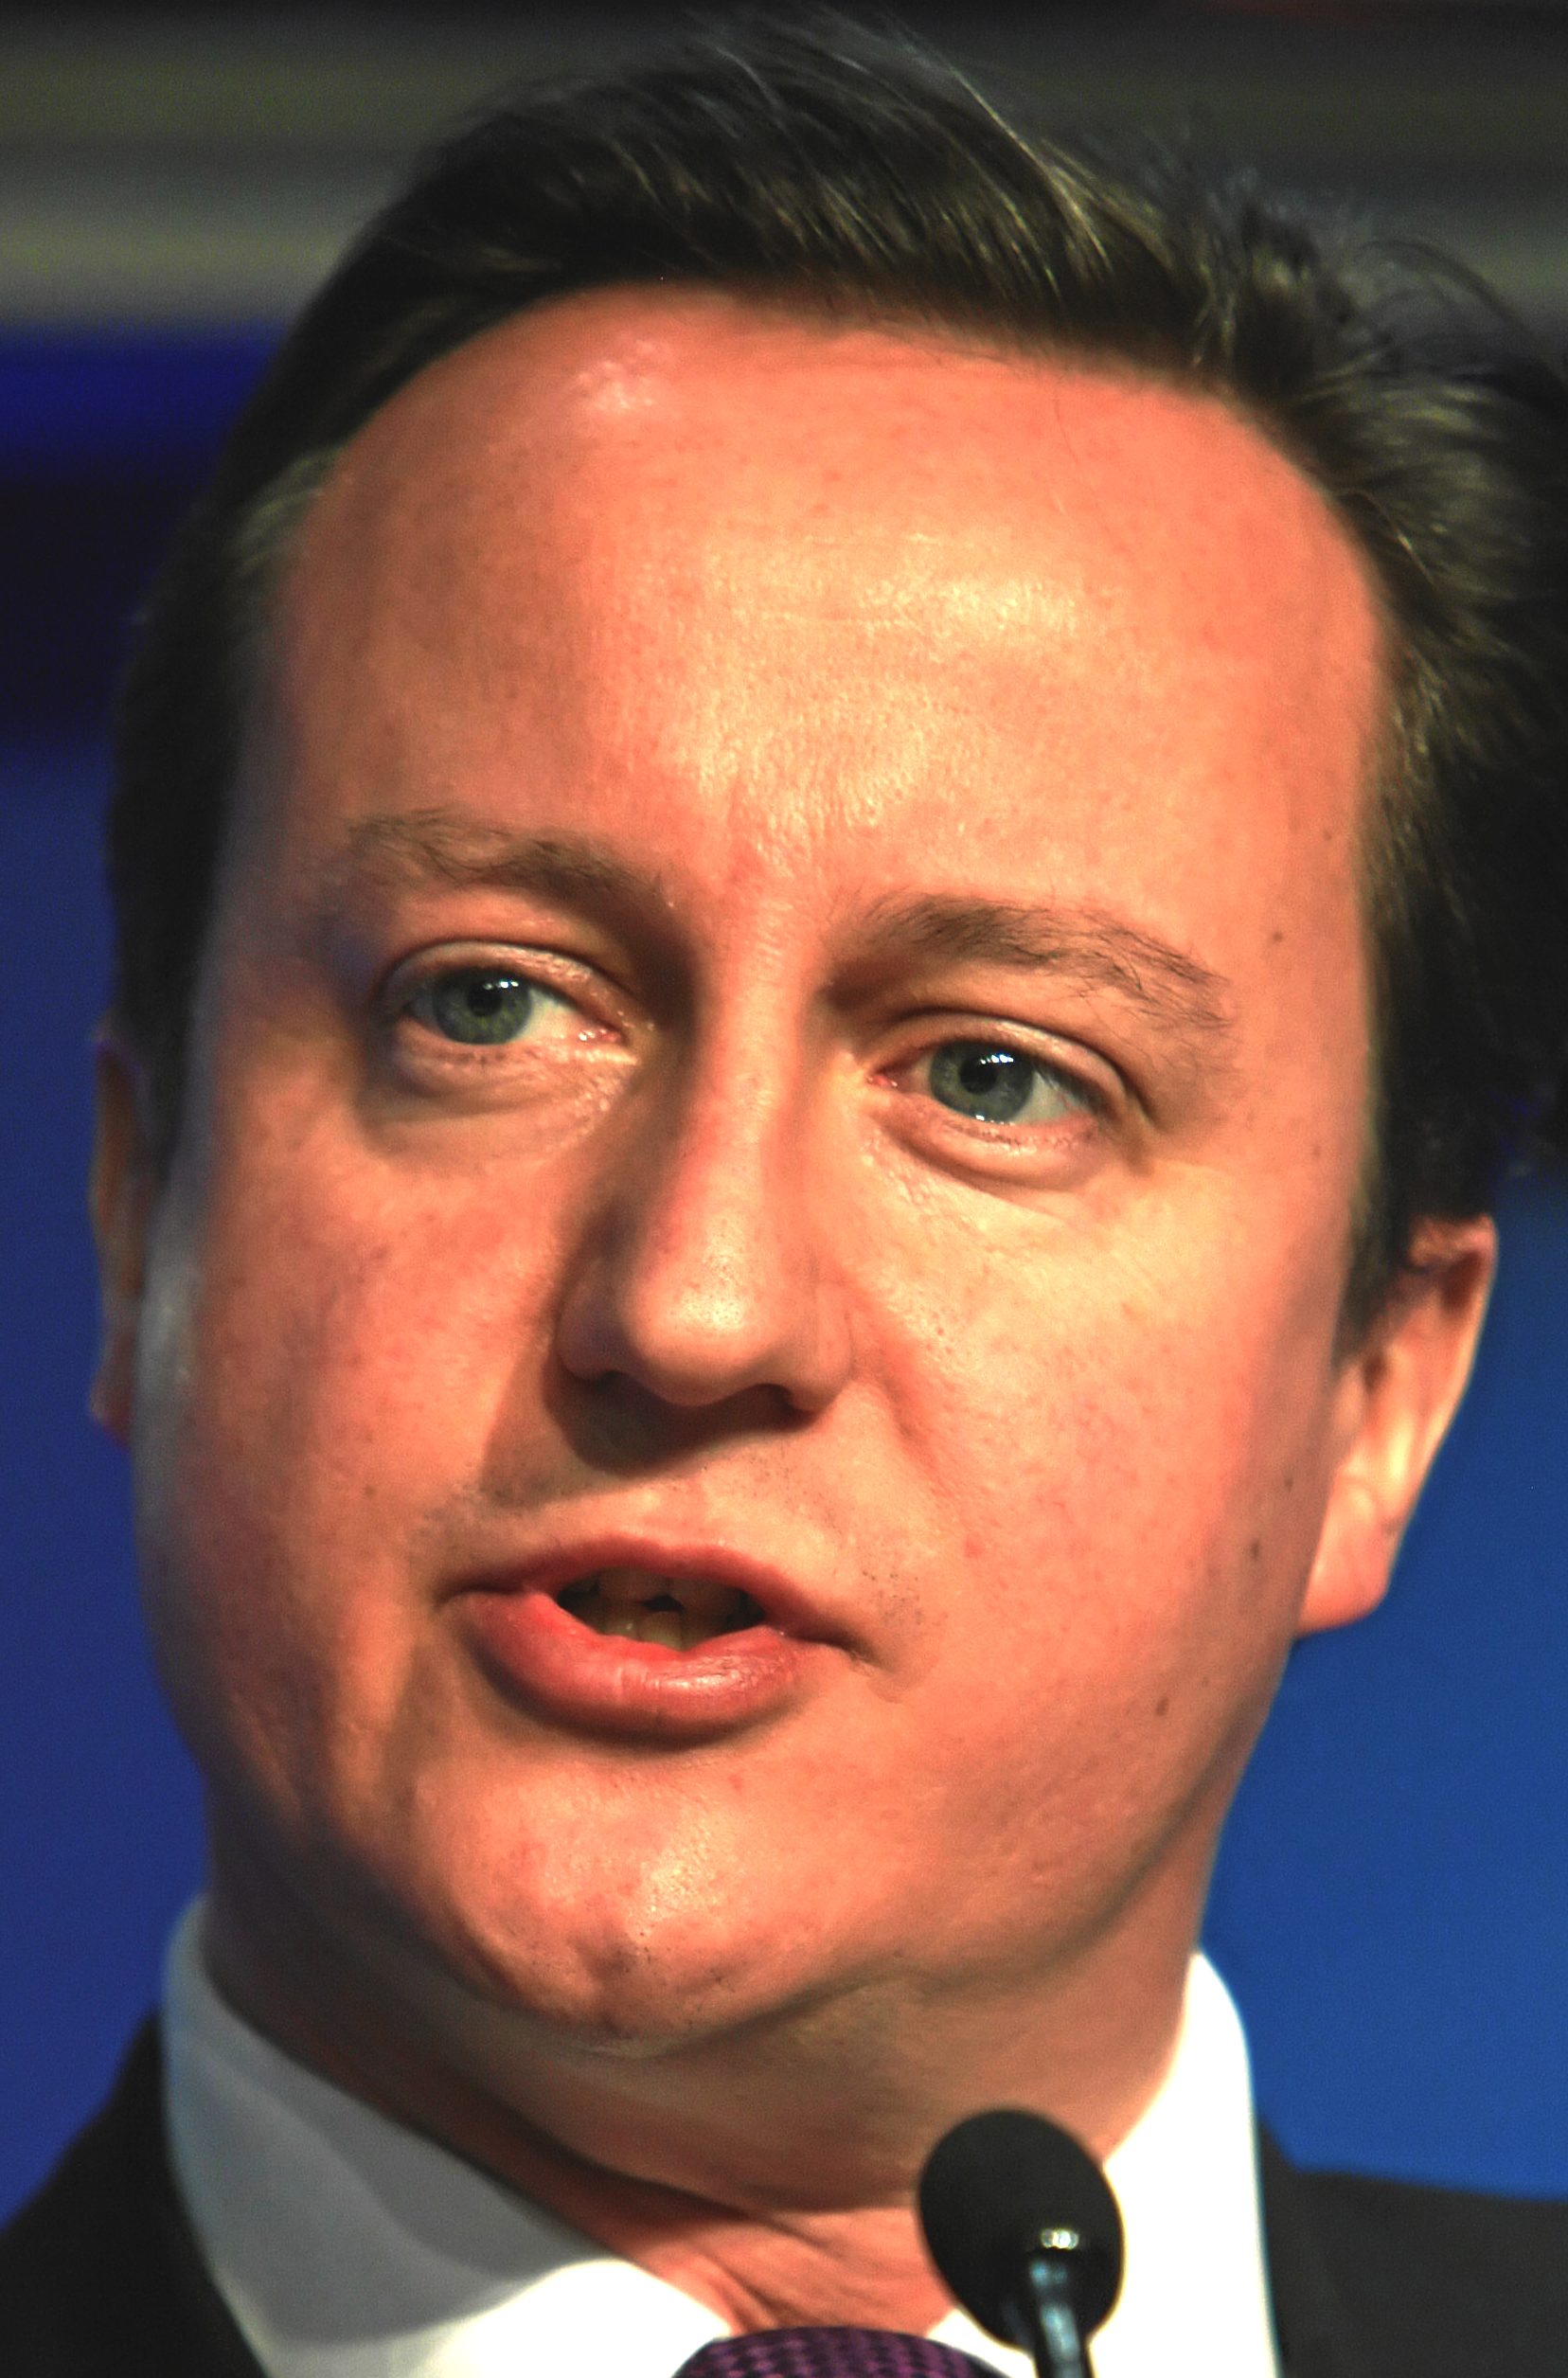 David (the chameleon) Cameron, it pays to blow with the wind